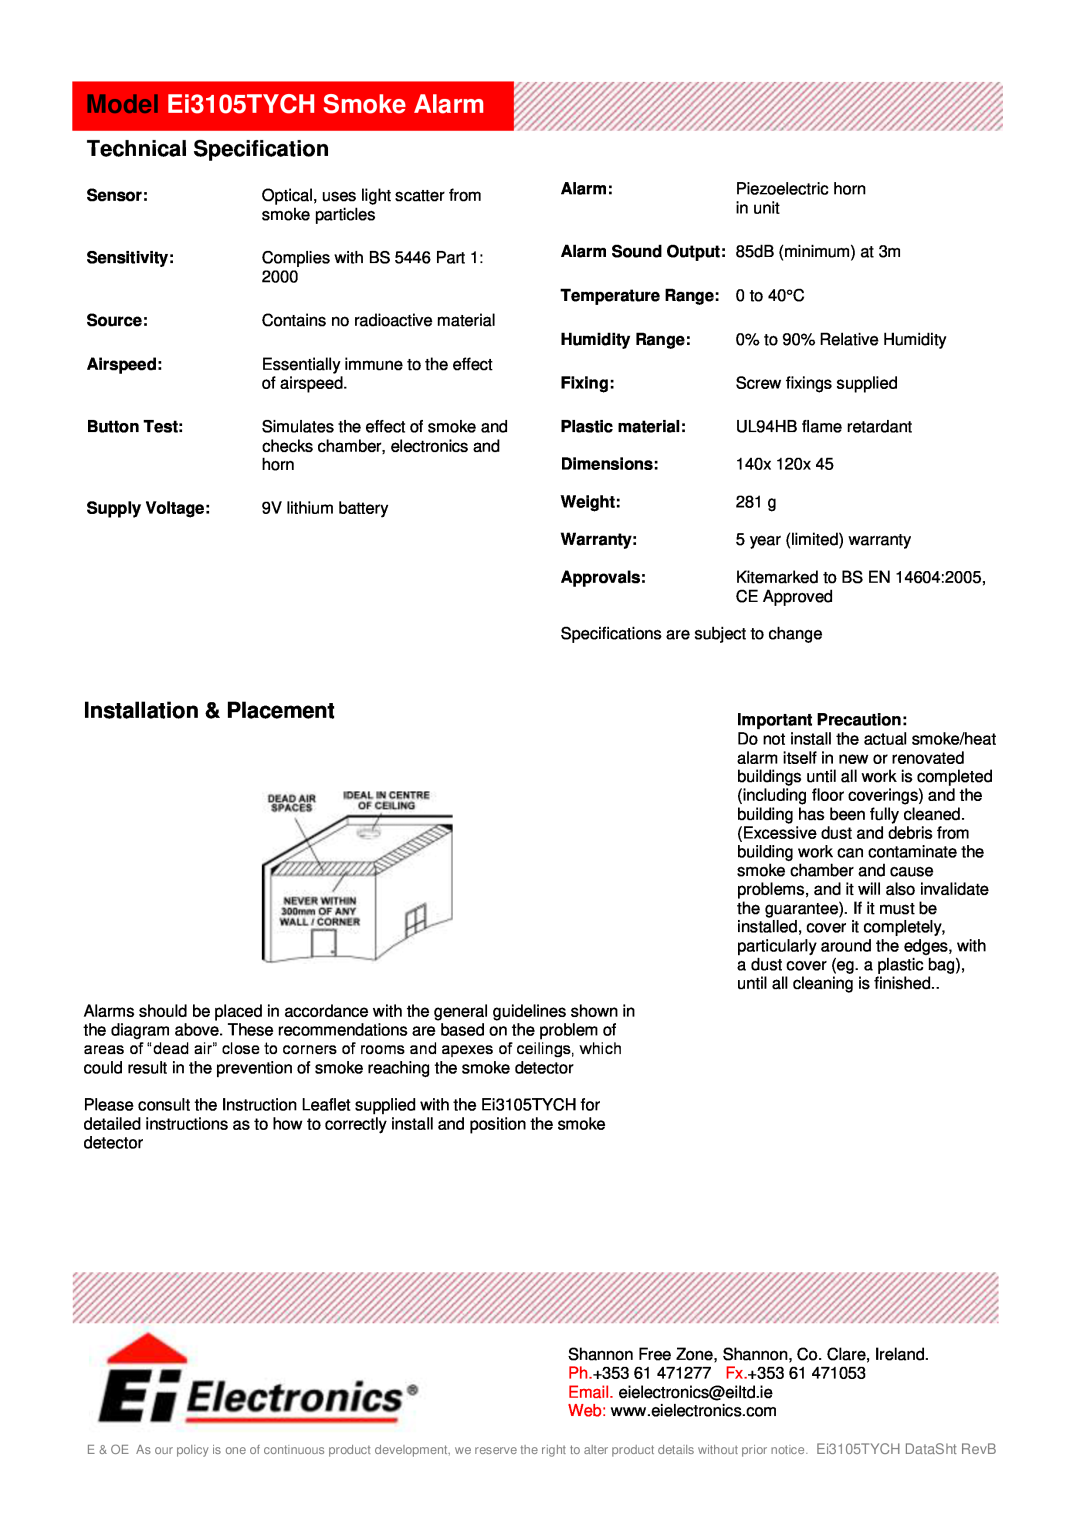 Ei Electronics manual Model Ei3105TYCH Smoke Alarm, Technical Specification, Installation & Placement 